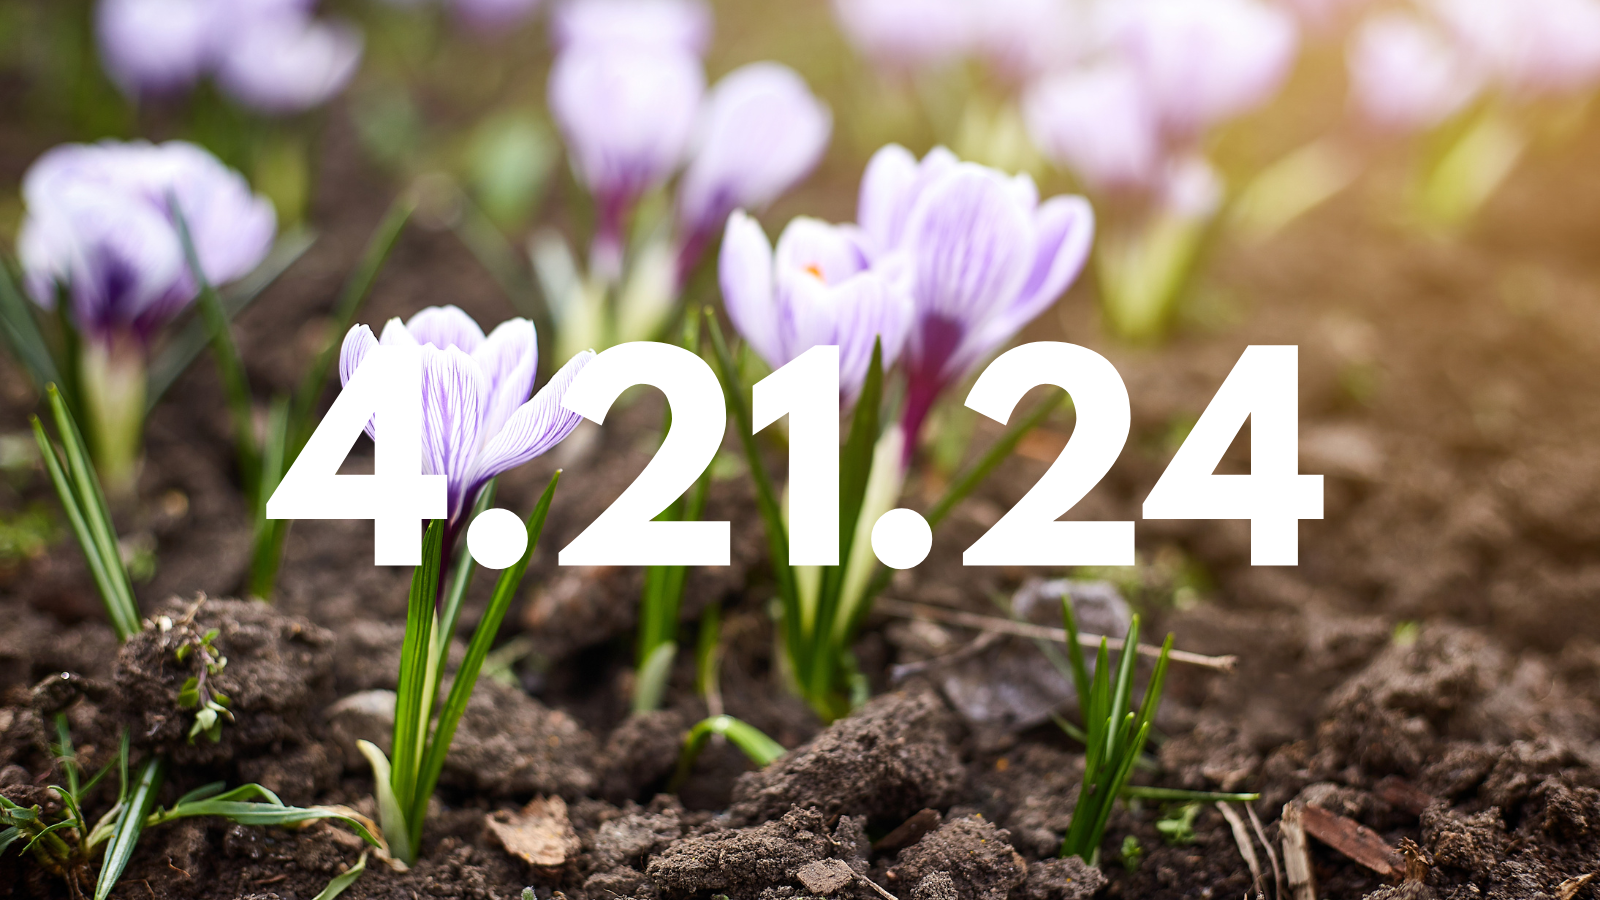 Featured image for “4.21.24”